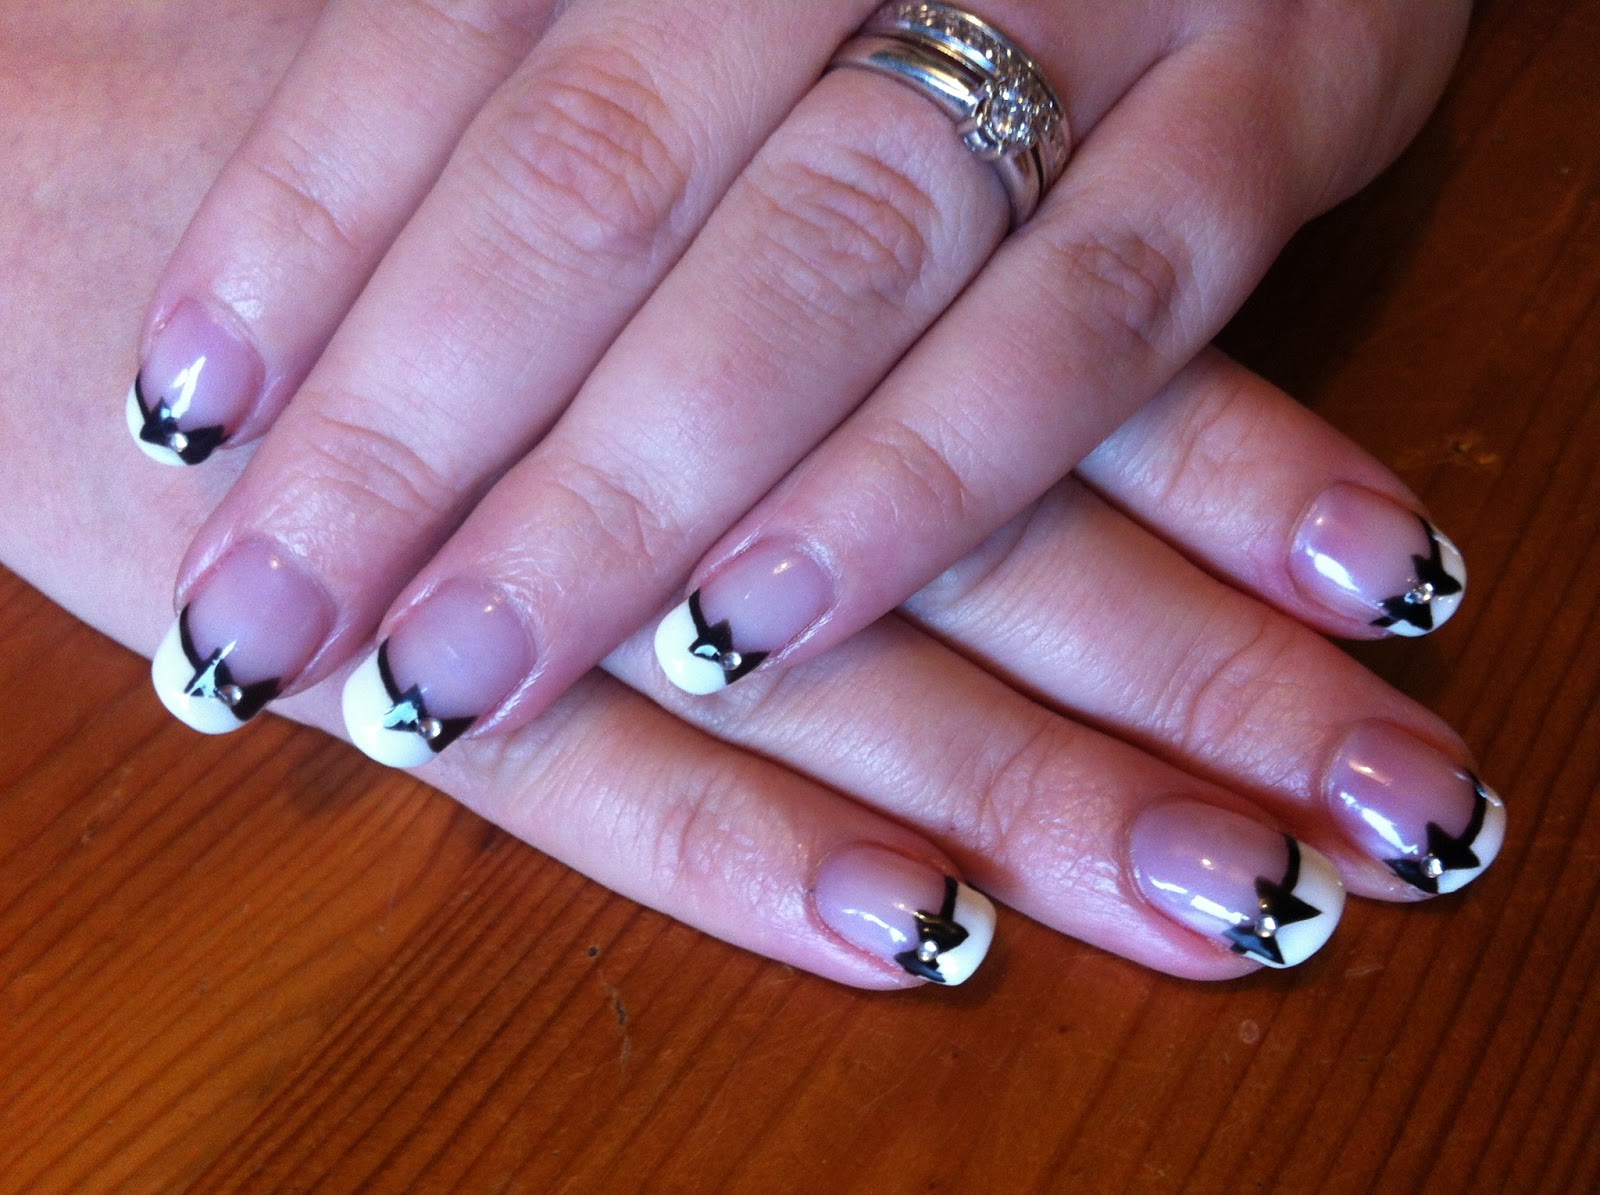 Brush up and Polish up! CND Shellac Nail Art French Manicure with